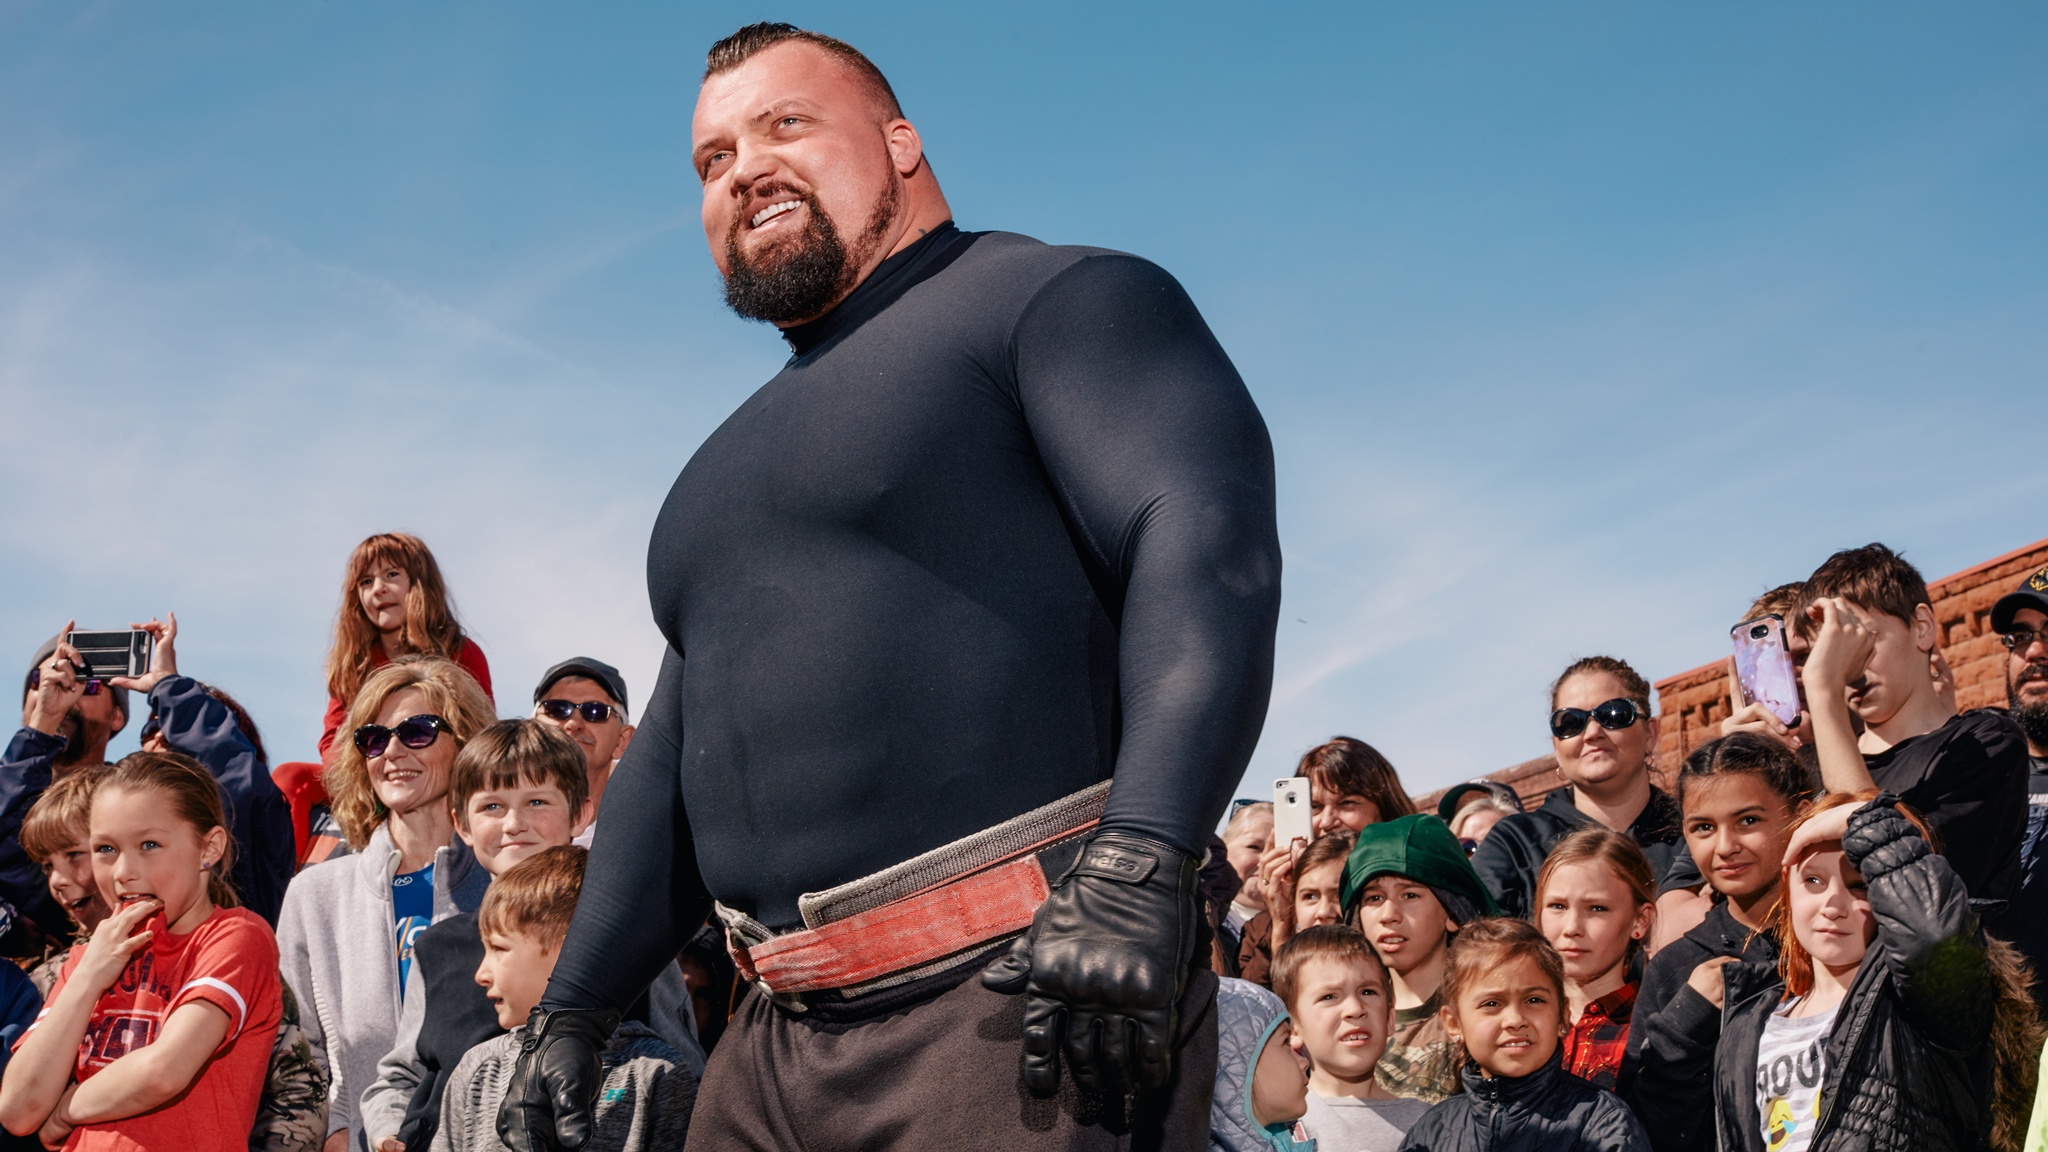 Eddie Hall - The Strongest Man in History Cast